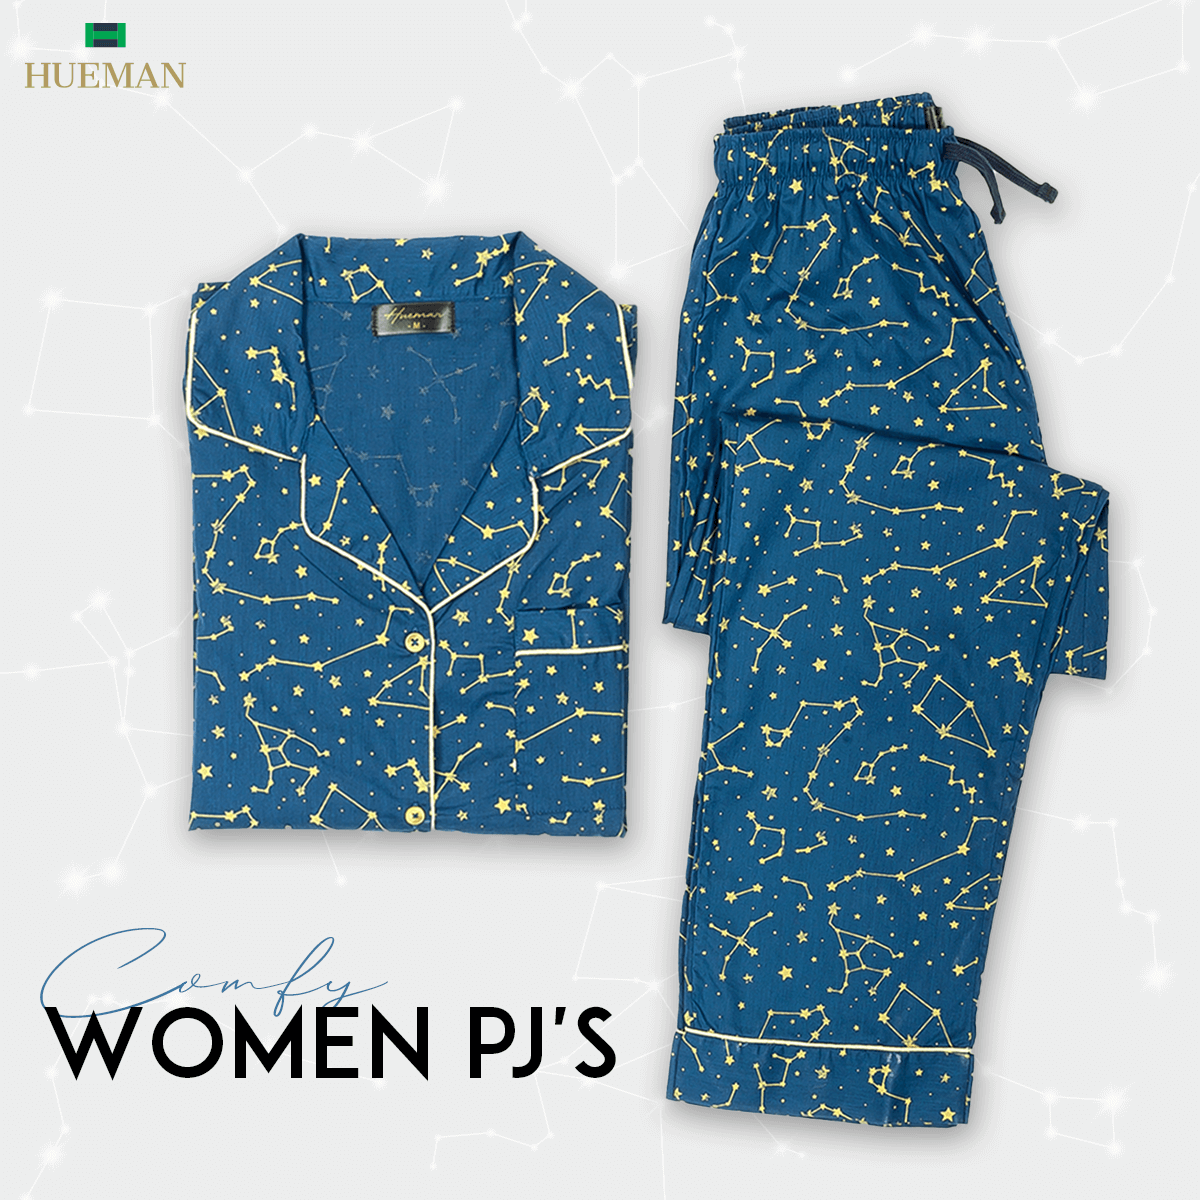 Lighten Up Your Casual Nights With Stylish Ladies Sleeping Suits